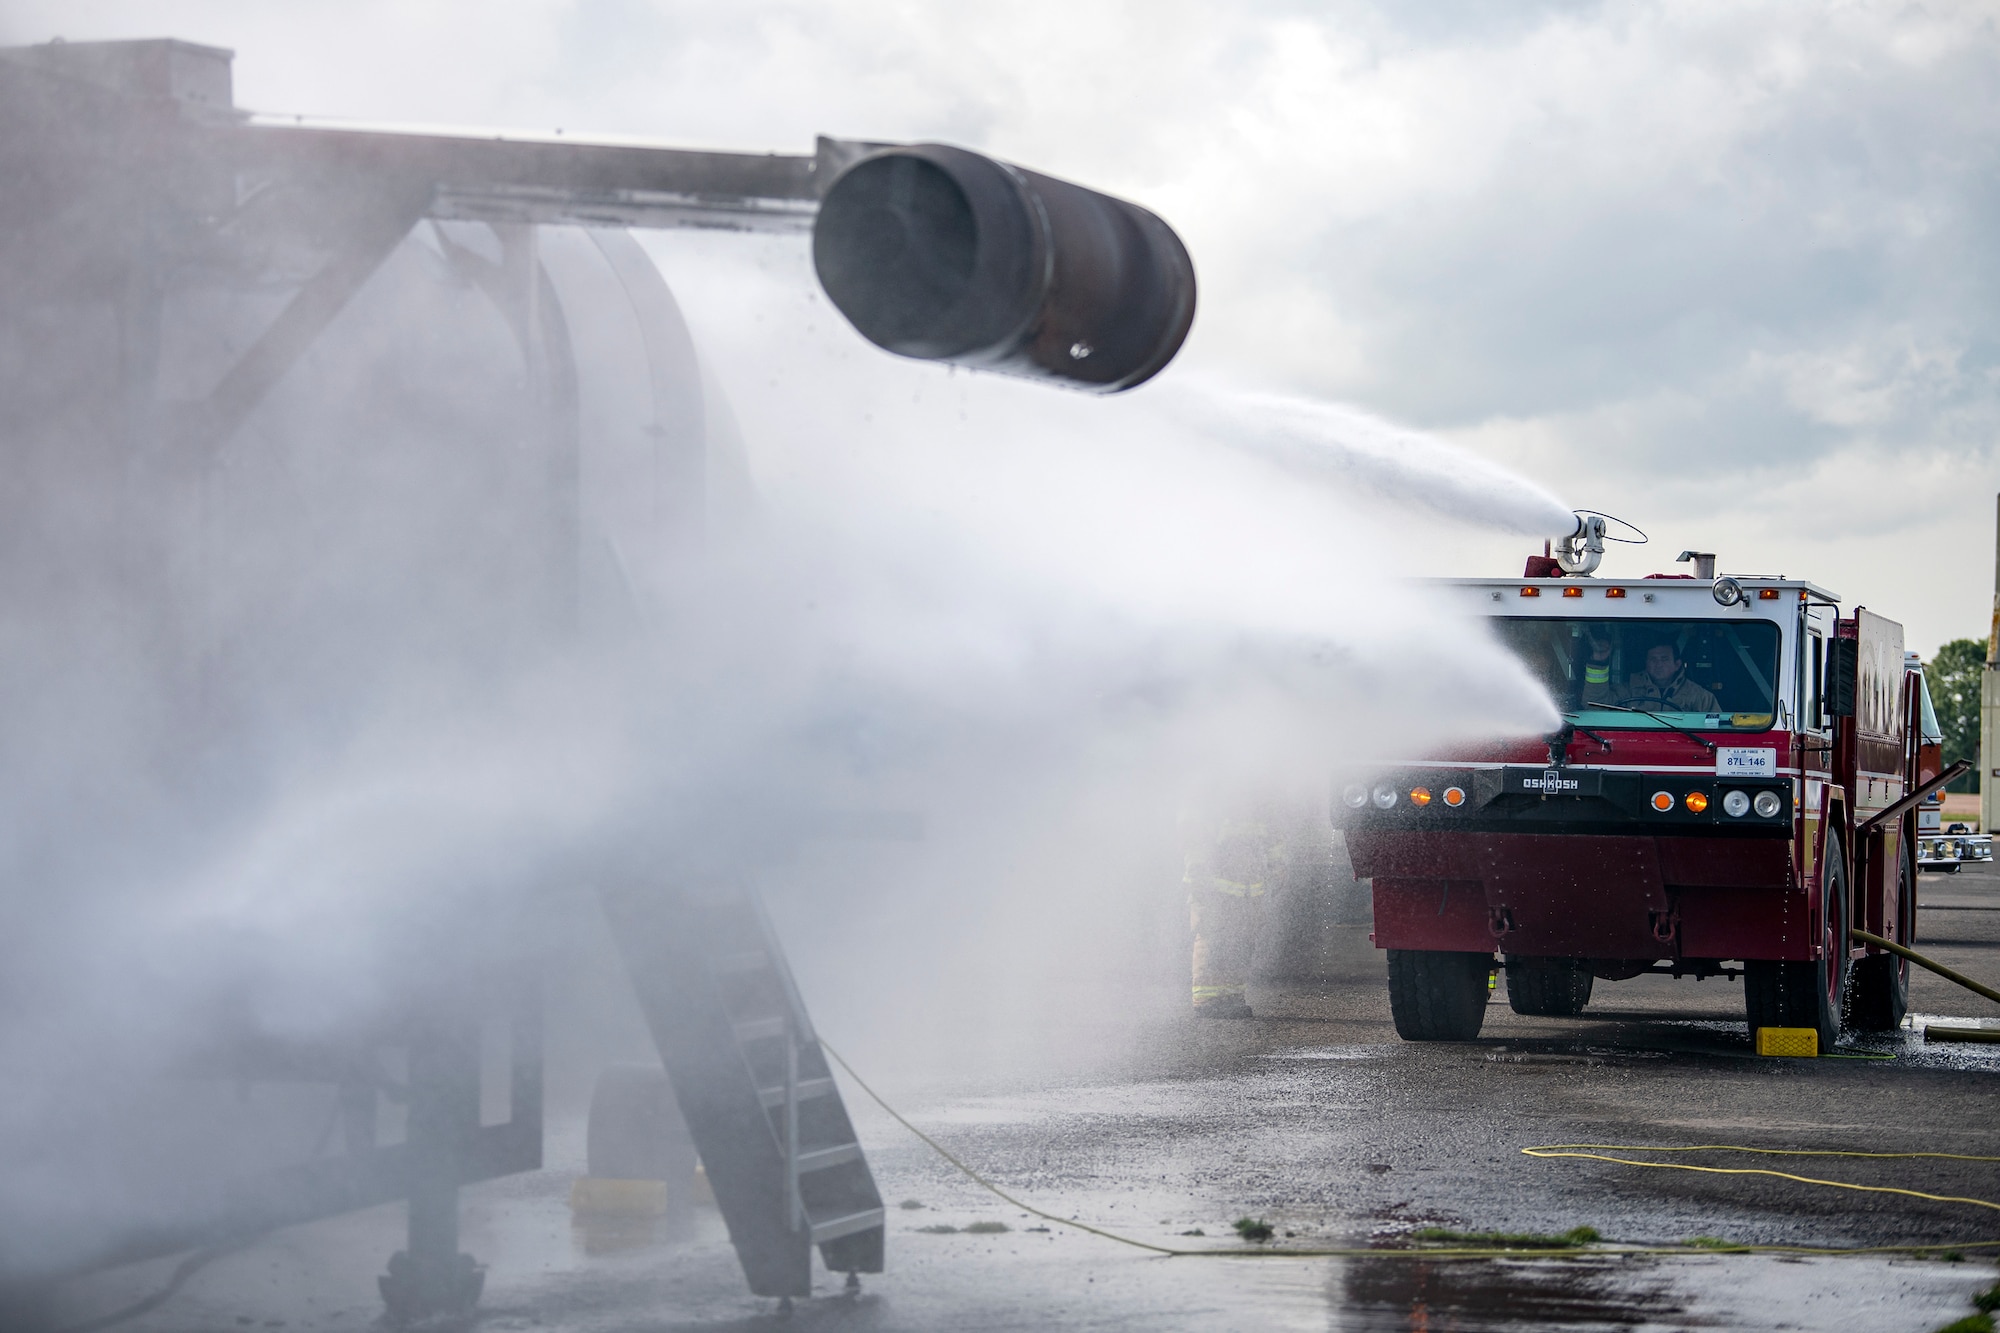 A firetruck from the 422d Fire Emergency Services extinguishes an aircraft fire during  a live-fire training exercise at RAF Fairford, England, Oct. 3, 2022. Firefighters from the 422d FES, are required to complete live-fire training bi-annualy to test thief overall readiness and ability to properly extinguish an aircraft fire. (U.S. Air Force photo by Staff Sgt. Eugene Oliver)